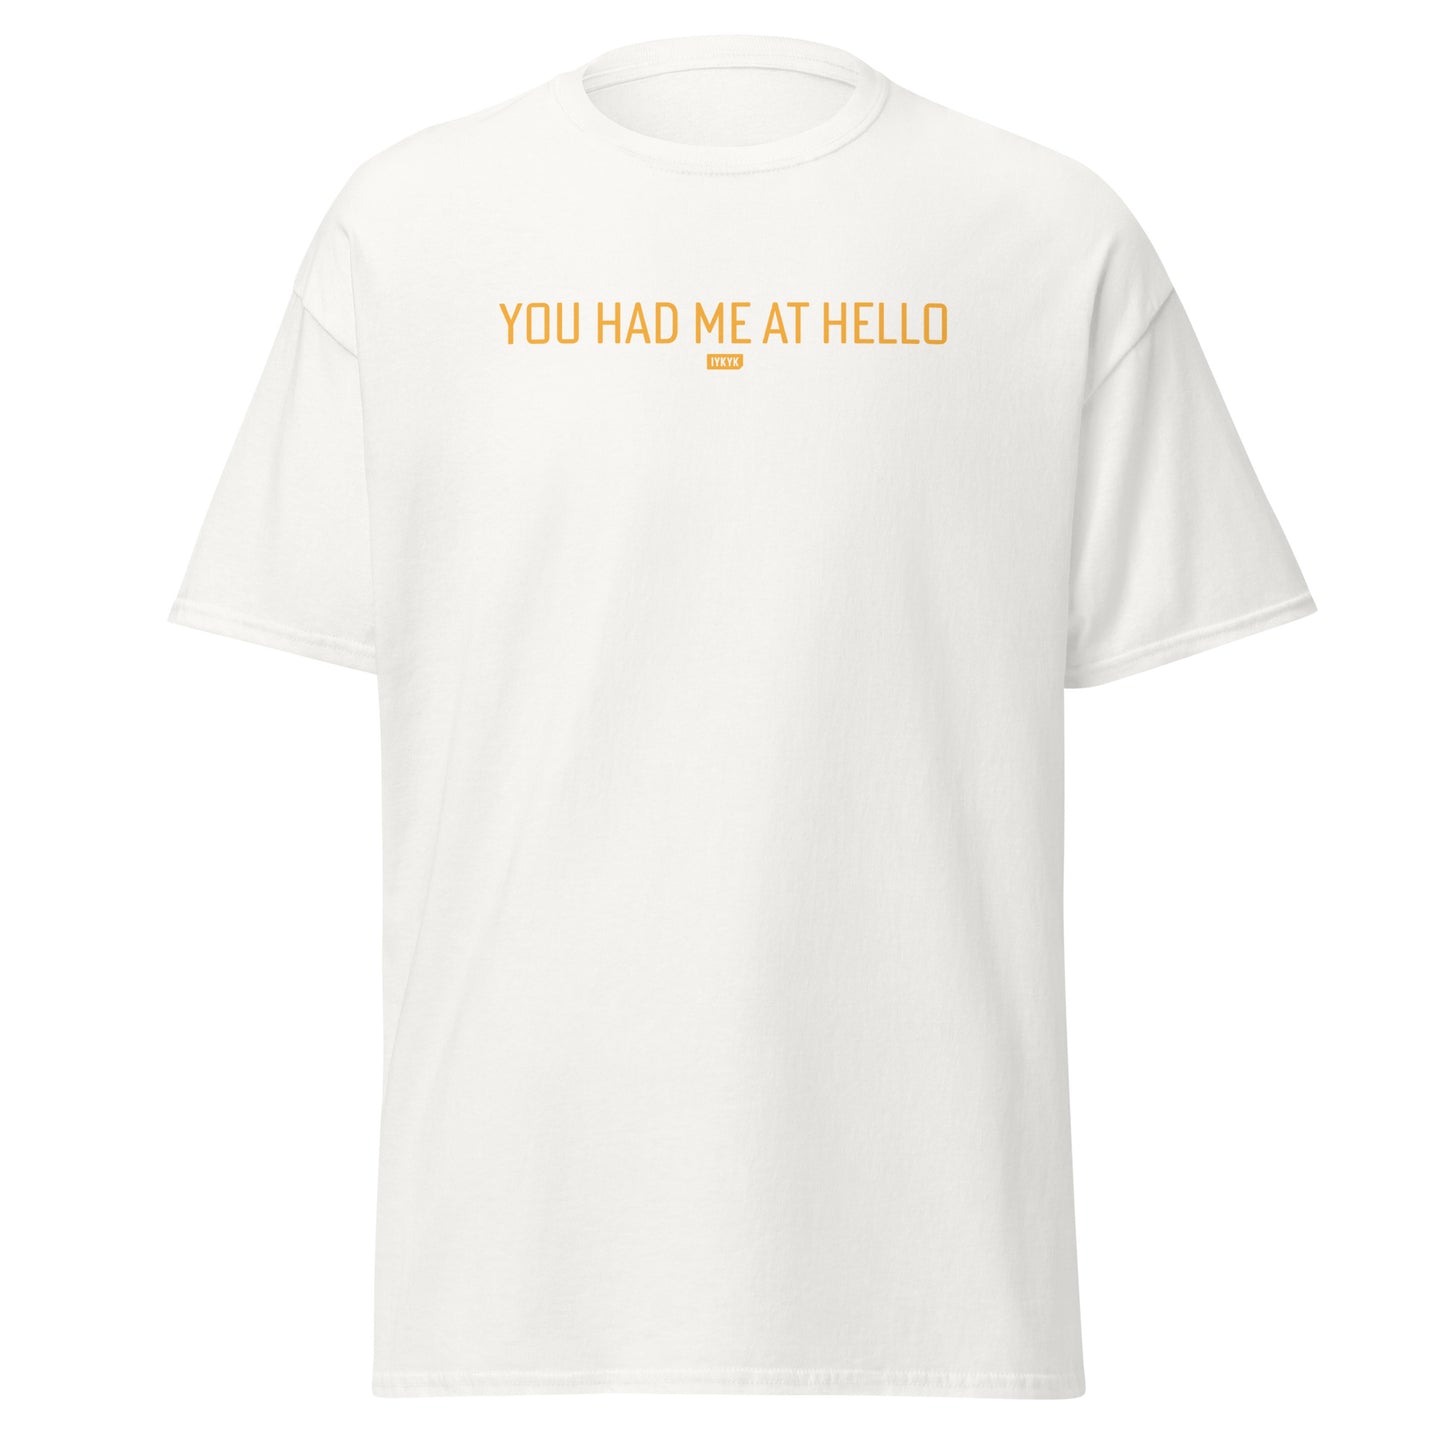 Classic Everyday You Had Me At Hello Jerry Maguire Tee